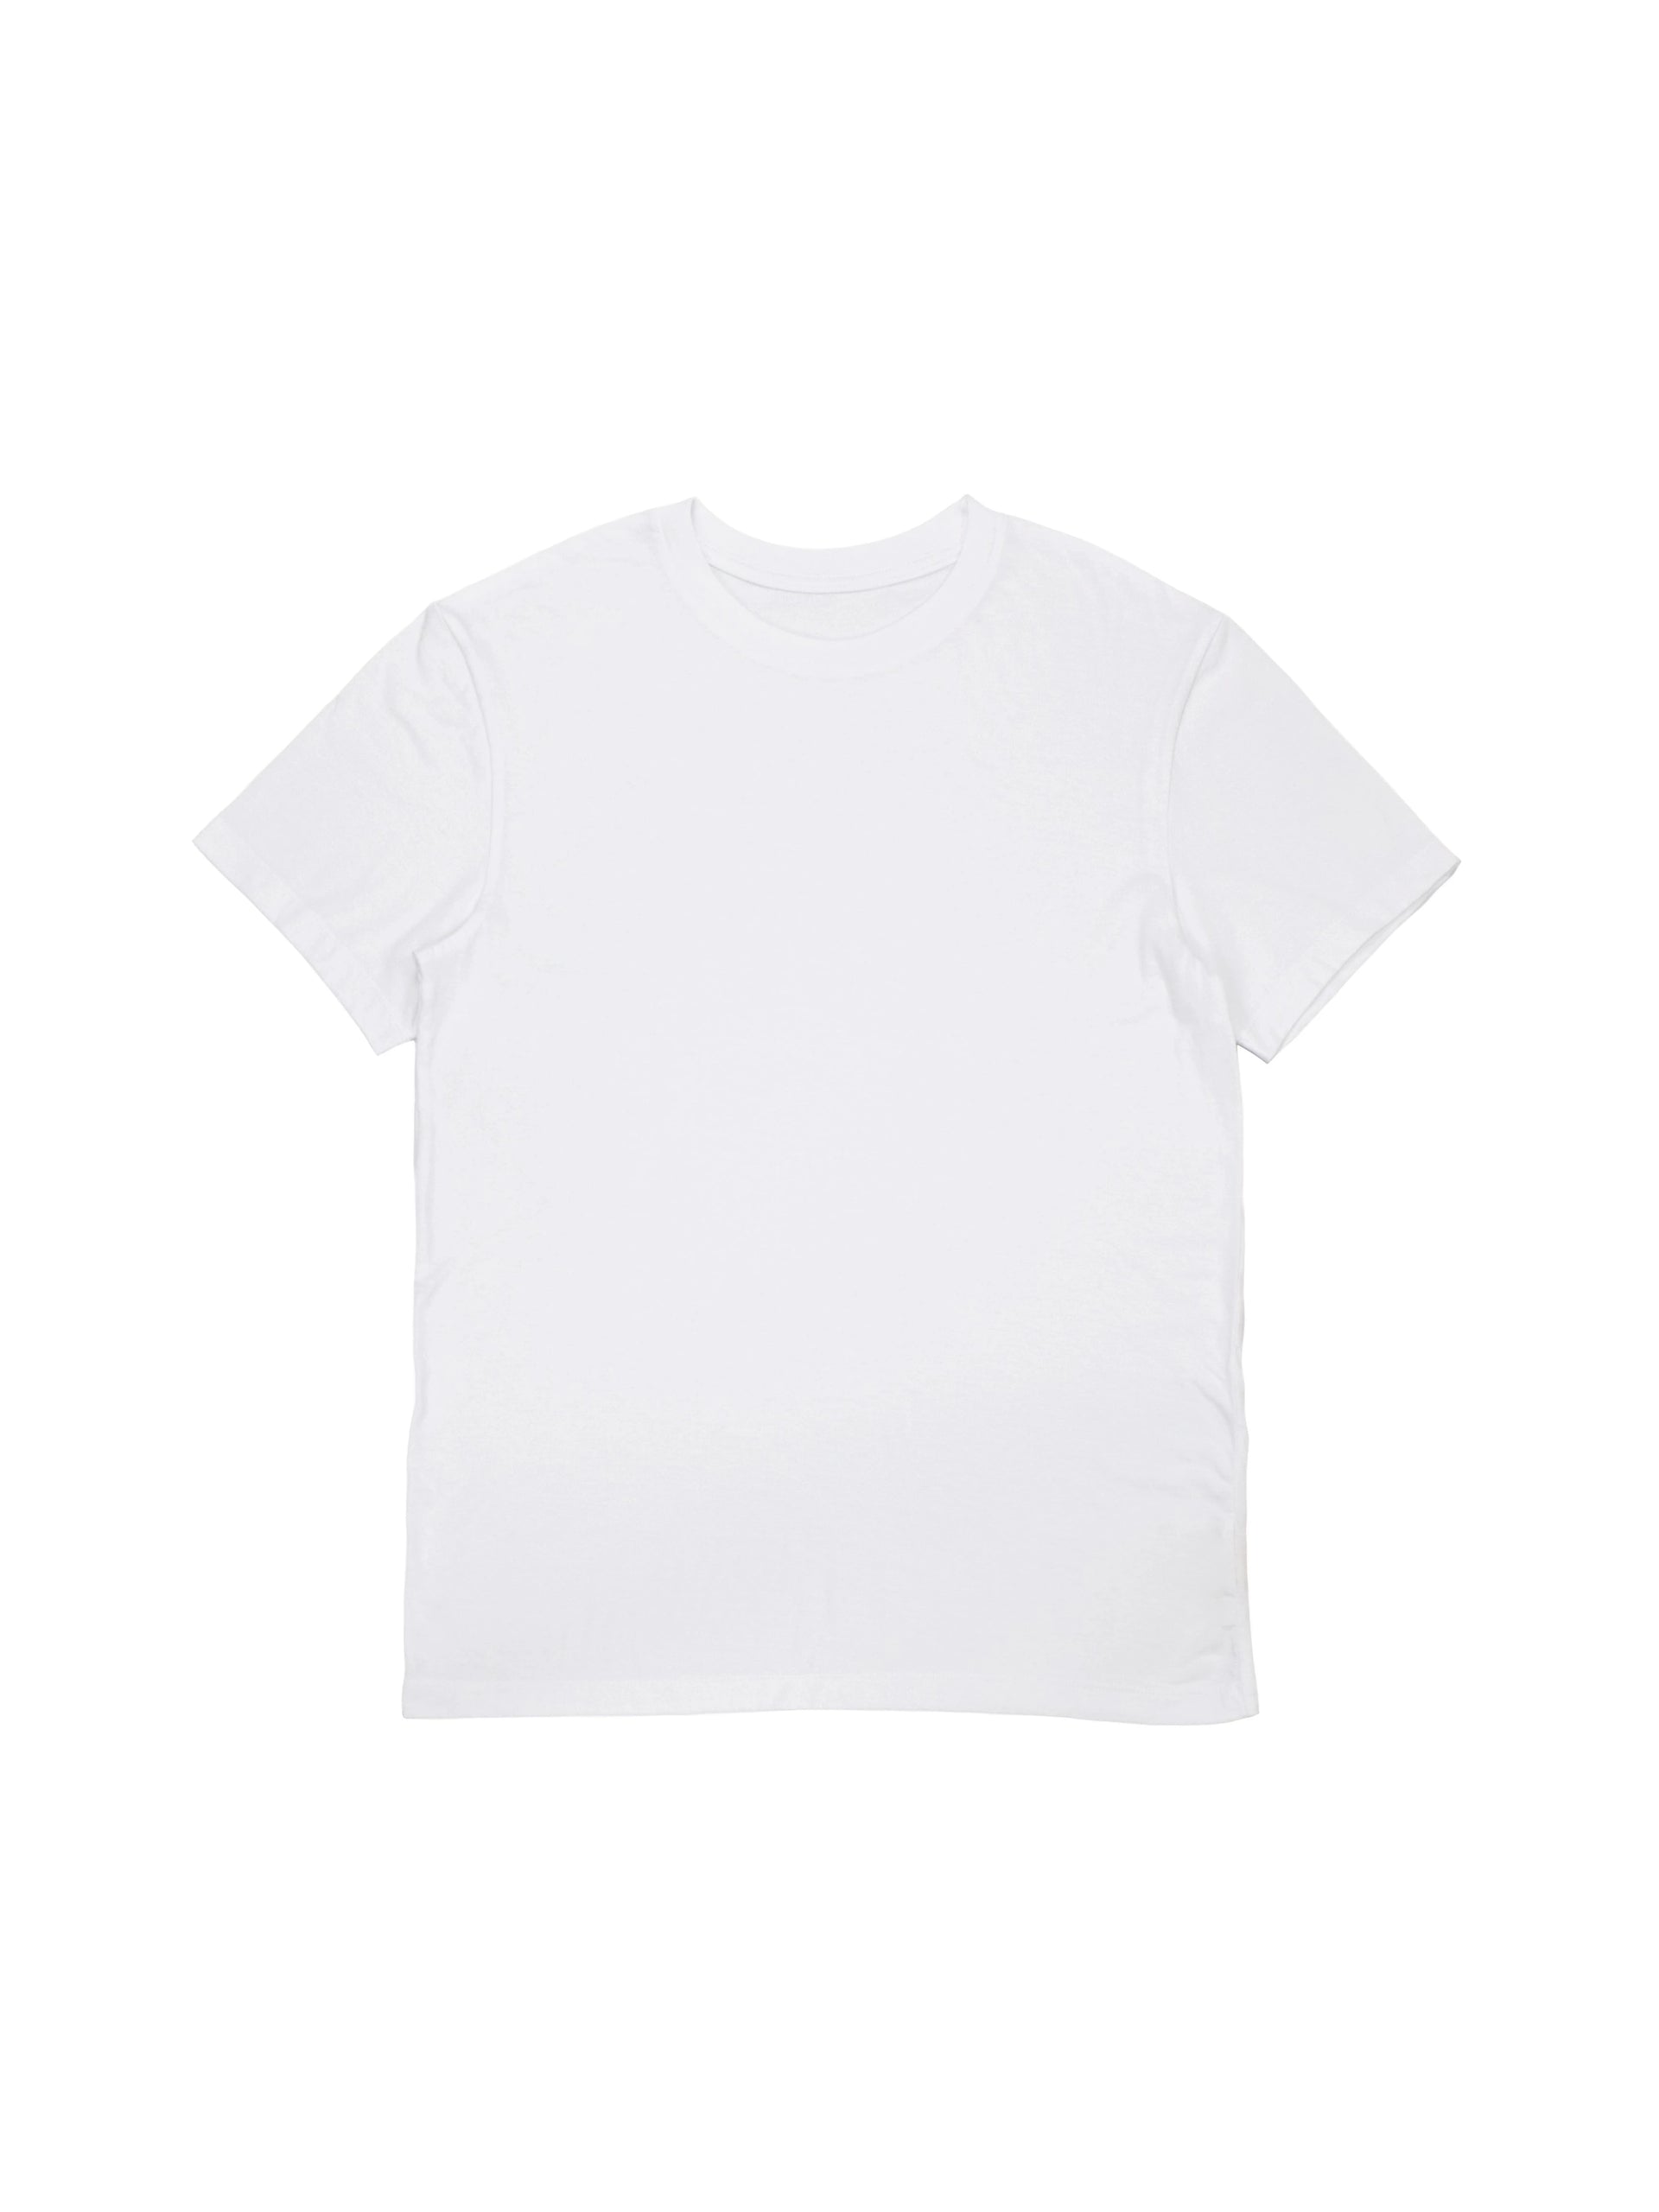 BOXY Fit White T-Shirt Essential - 100% Organic Cotton Made In